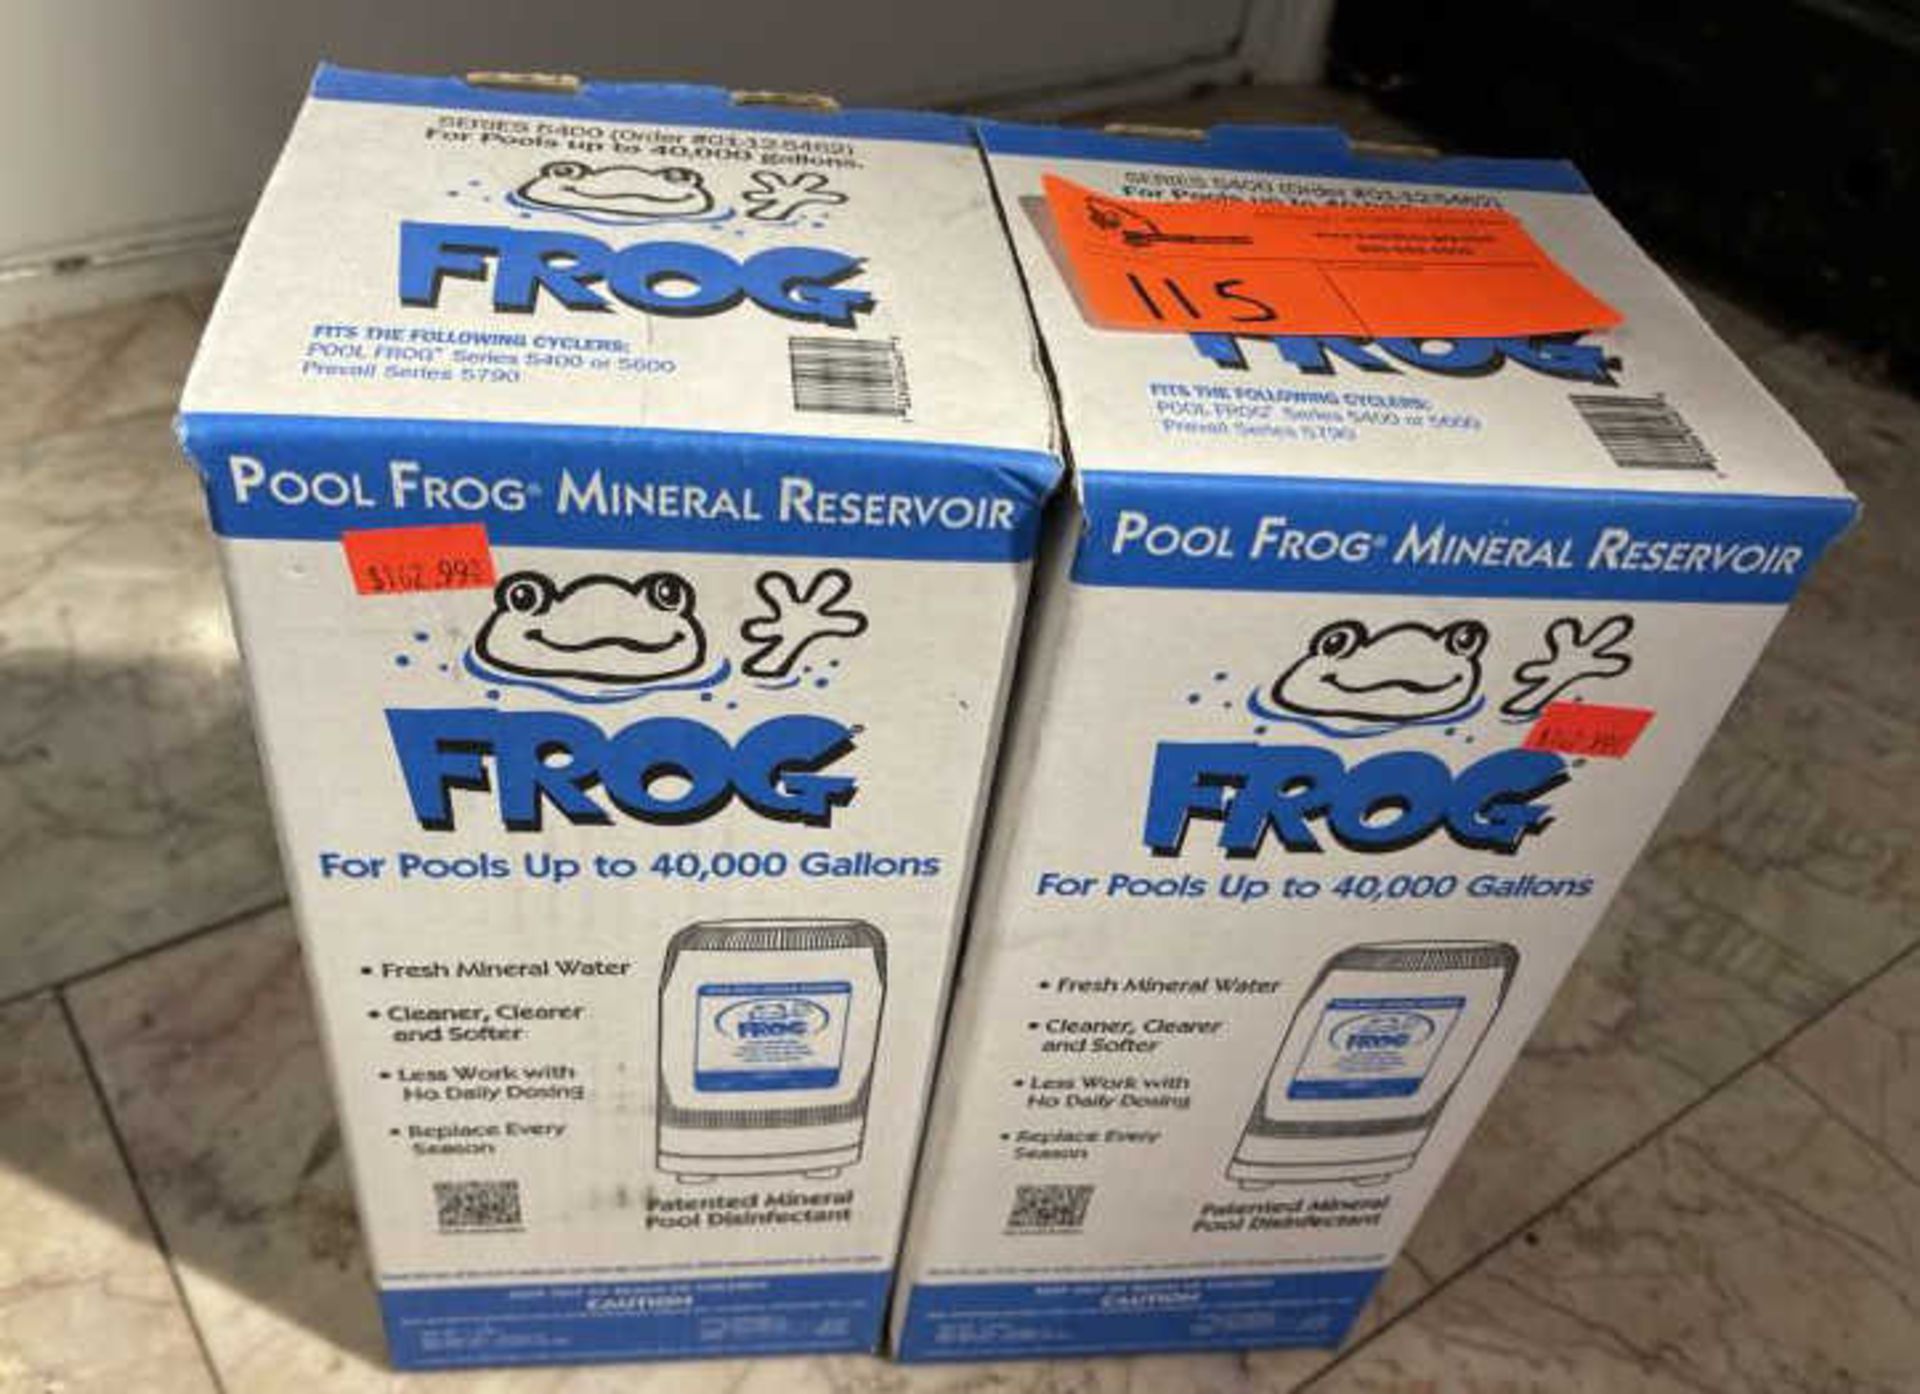 Lot of (2) Pool Frog mineral reservoir refills for pools up to 40,000 gallons, series 540